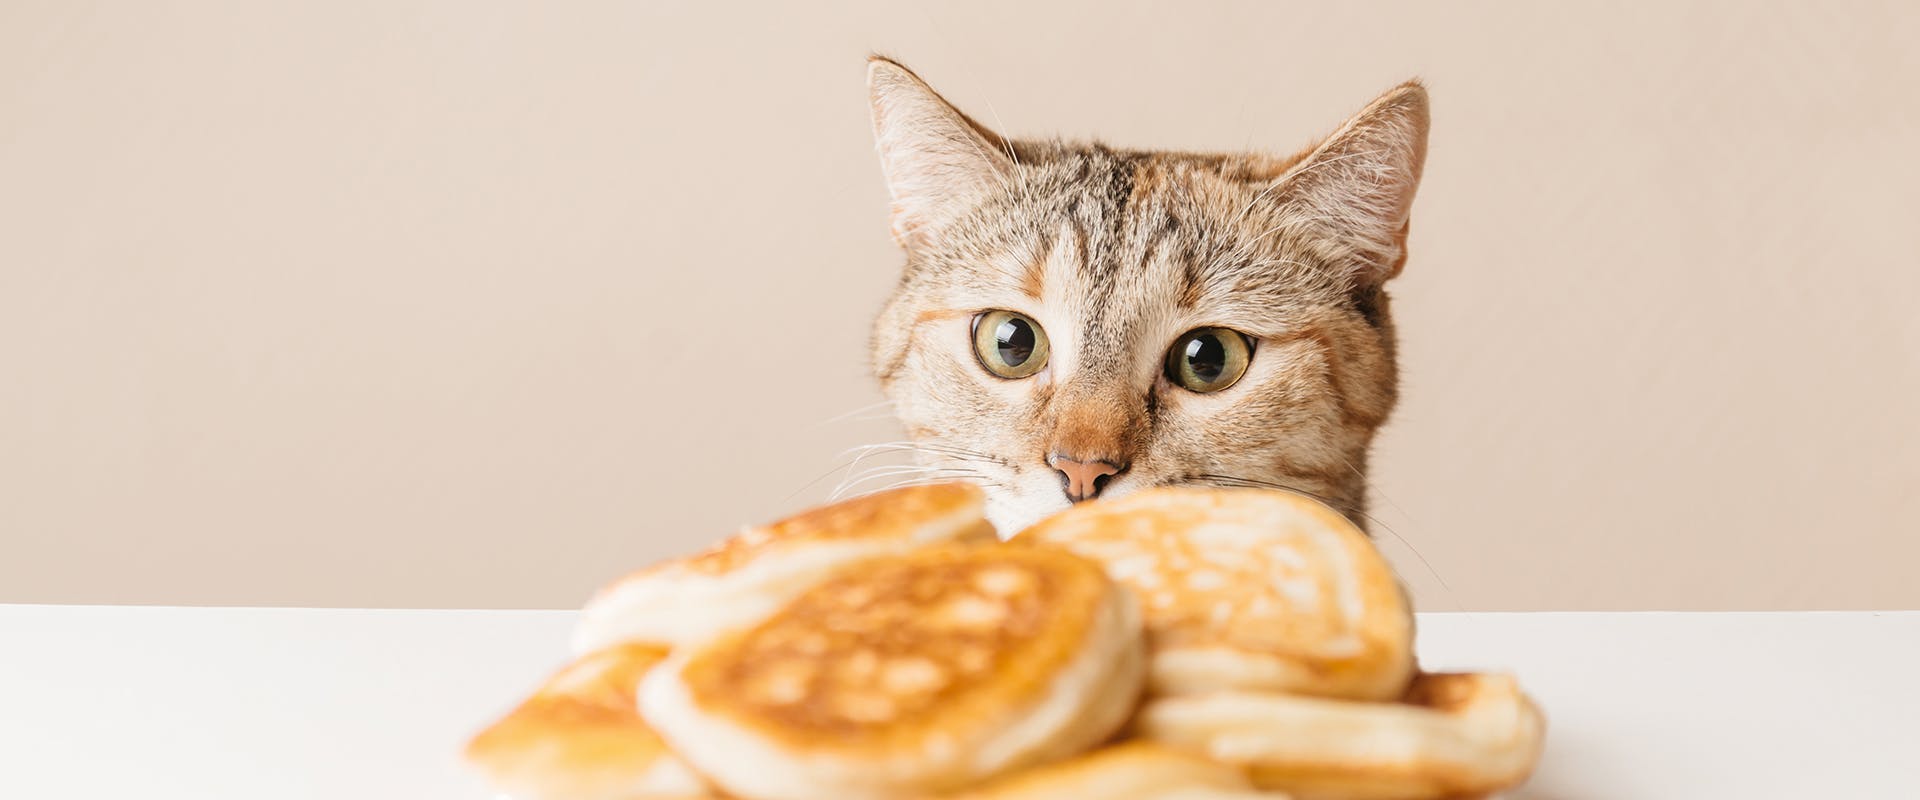 A cat looking inquisitively at a plate of baked patries